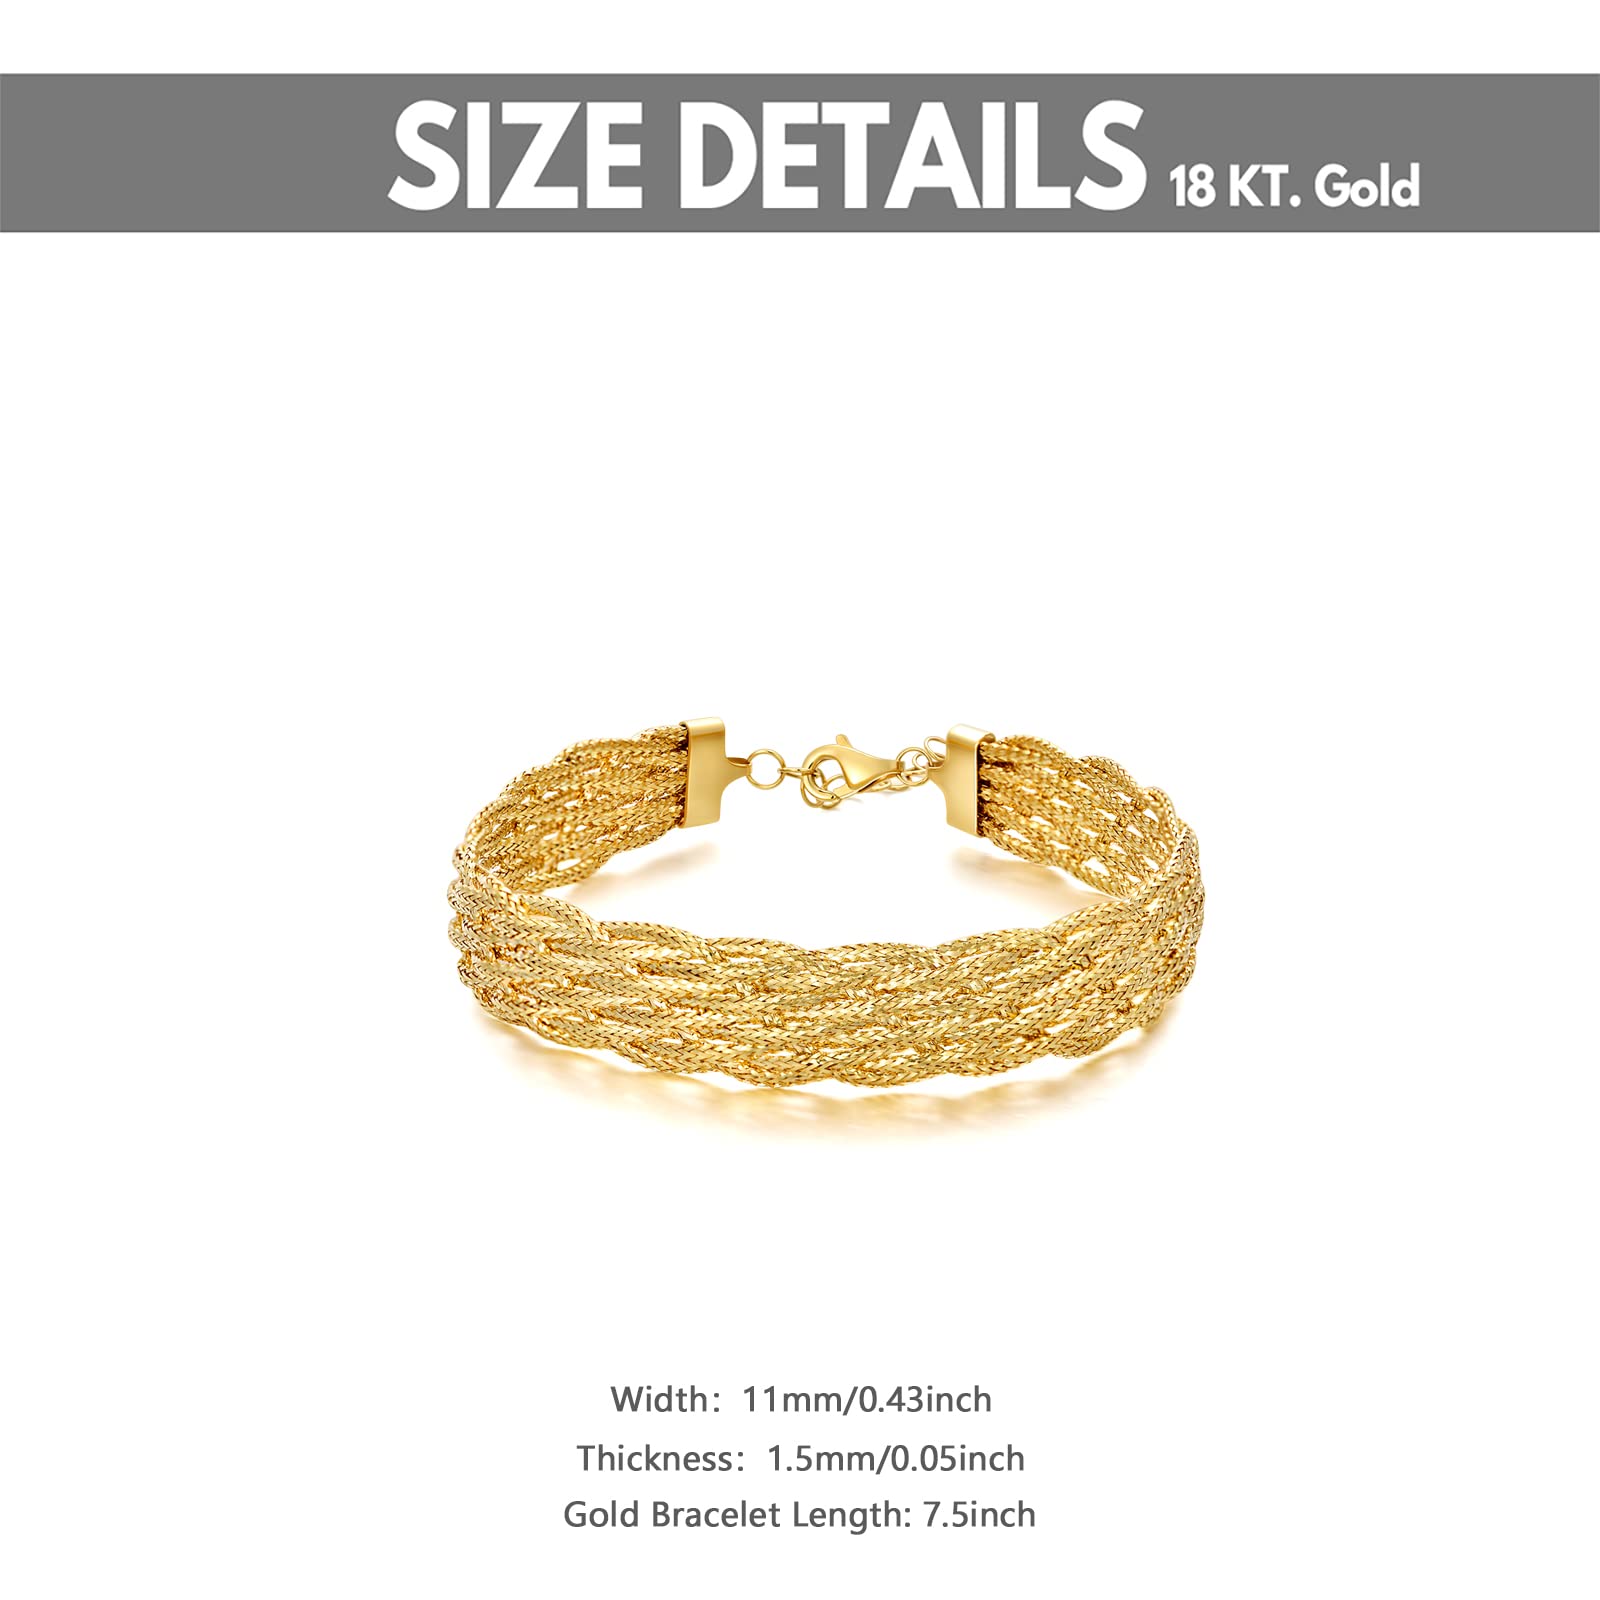 18k Real Gold Braided Bracelet for Women, 11mm Width Yellow Gold Italian Woven Link Bracelet 5 grams Weight Fine Jewelry Gift for Her, 7.5inch Adjustable Length